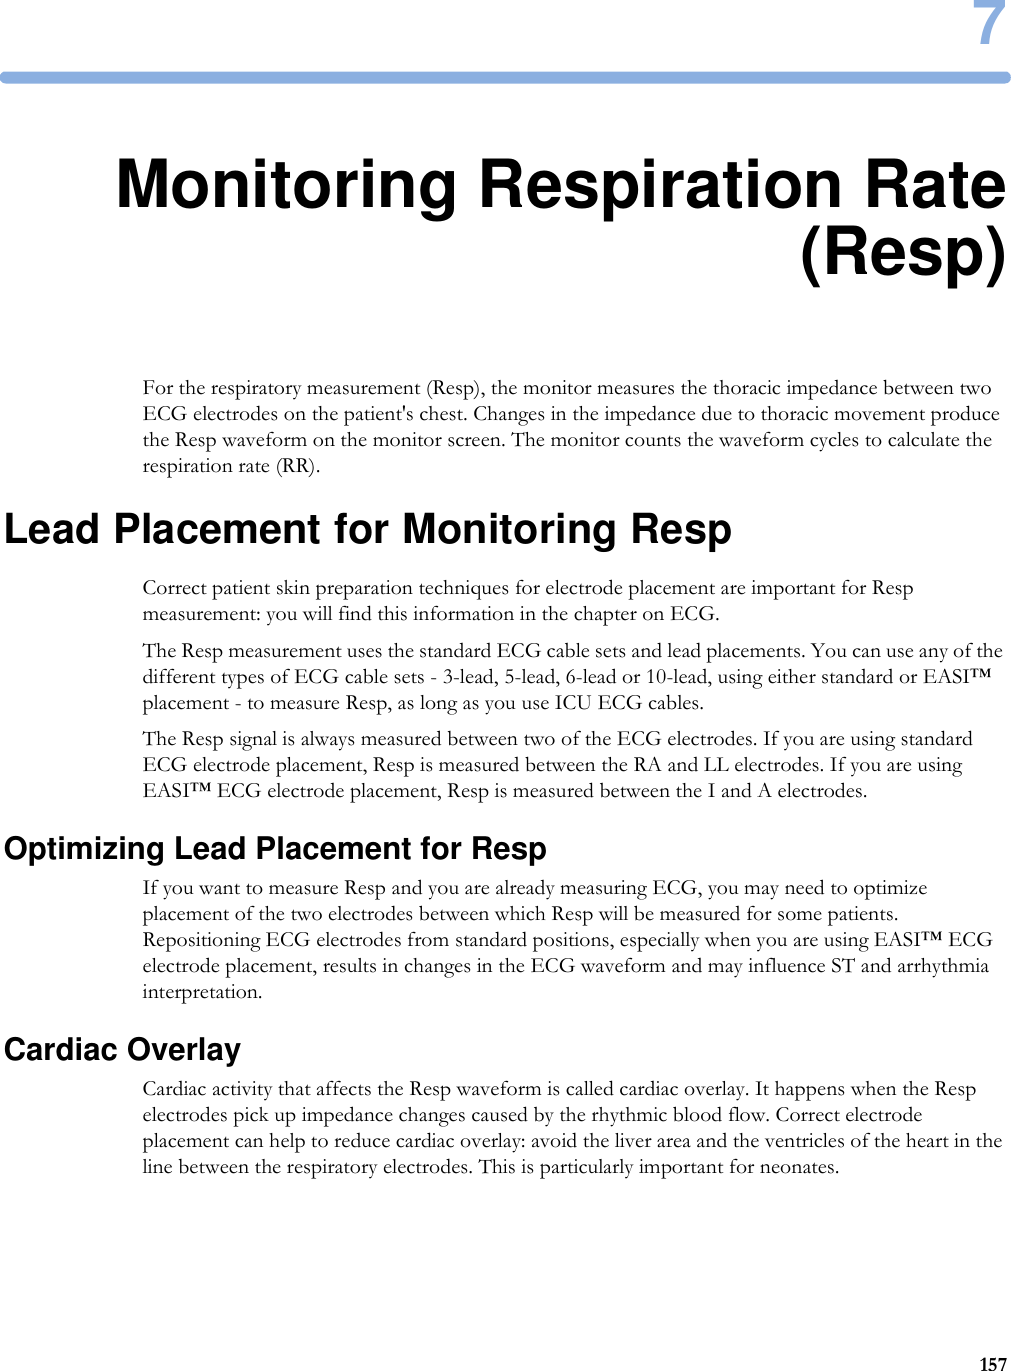 71577Monitoring Respiration Rate(Resp)For the respiratory measurement (Resp), the monitor measures the thoracic impedance between two ECG electrodes on the patient&apos;s chest. Changes in the impedance due to thoracic movement produce the Resp waveform on the monitor screen. The monitor counts the waveform cycles to calculate the respiration rate (RR).Lead Placement for Monitoring RespCorrect patient skin preparation techniques for electrode placement are important for Resp measurement: you will find this information in the chapter on ECG.The Resp measurement uses the standard ECG cable sets and lead placements. You can use any of the different types of ECG cable sets - 3-lead, 5-lead, 6-lead or 10-lead, using either standard or EASI™ placement - to measure Resp, as long as you use ICU ECG cables.The Resp signal is always measured between two of the ECG electrodes. If you are using standard ECG electrode placement, Resp is measured between the RA and LL electrodes. If you are using EASI™ ECG electrode placement, Resp is measured between the I and A electrodes.Optimizing Lead Placement for RespIf you want to measure Resp and you are already measuring ECG, you may need to optimize placement of the two electrodes between which Resp will be measured for some patients. Repositioning ECG electrodes from standard positions, especially when you are using EASI™ ECG electrode placement, results in changes in the ECG waveform and may influence ST and arrhythmia interpretation.Cardiac OverlayCardiac activity that affects the Resp waveform is called cardiac overlay. It happens when the Resp electrodes pick up impedance changes caused by the rhythmic blood flow. Correct electrode placement can help to reduce cardiac overlay: avoid the liver area and the ventricles of the heart in the line between the respiratory electrodes. This is particularly important for neonates.